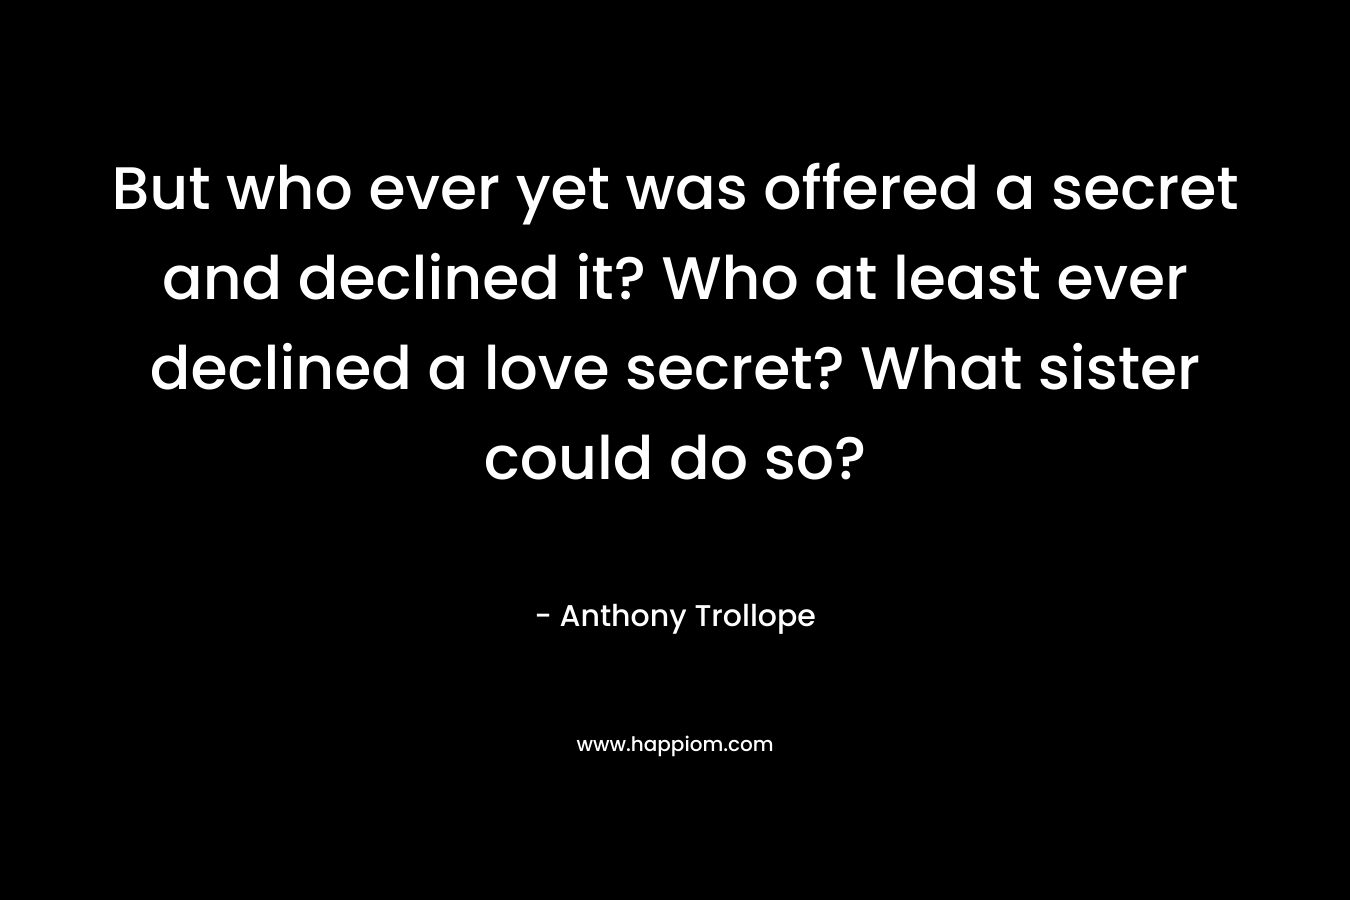 But who ever yet was offered a secret and declined it? Who at least ever declined a love secret? What sister could do so? – Anthony Trollope